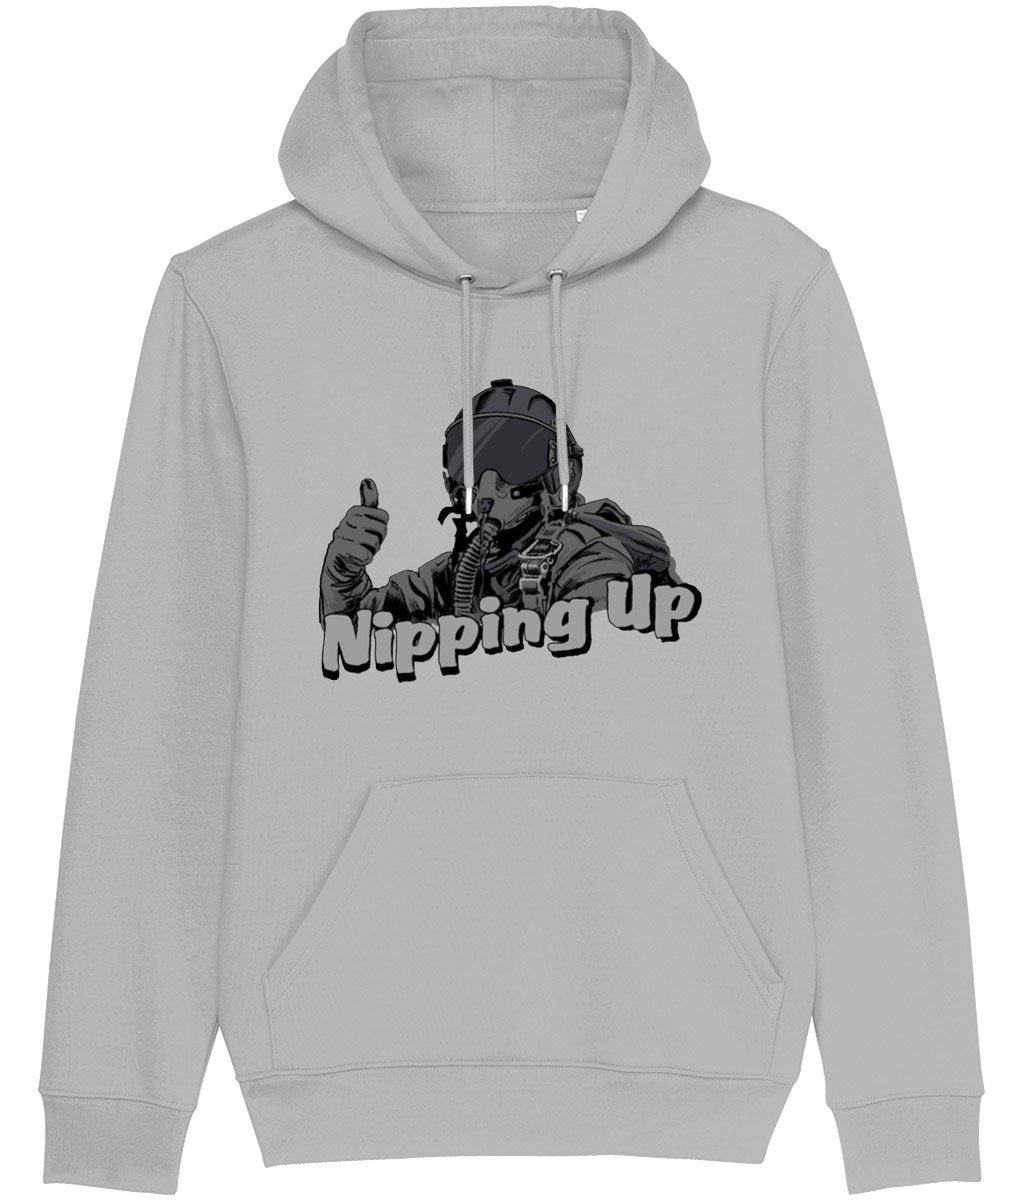 Nipping Up Fighter Pilot Hoodie